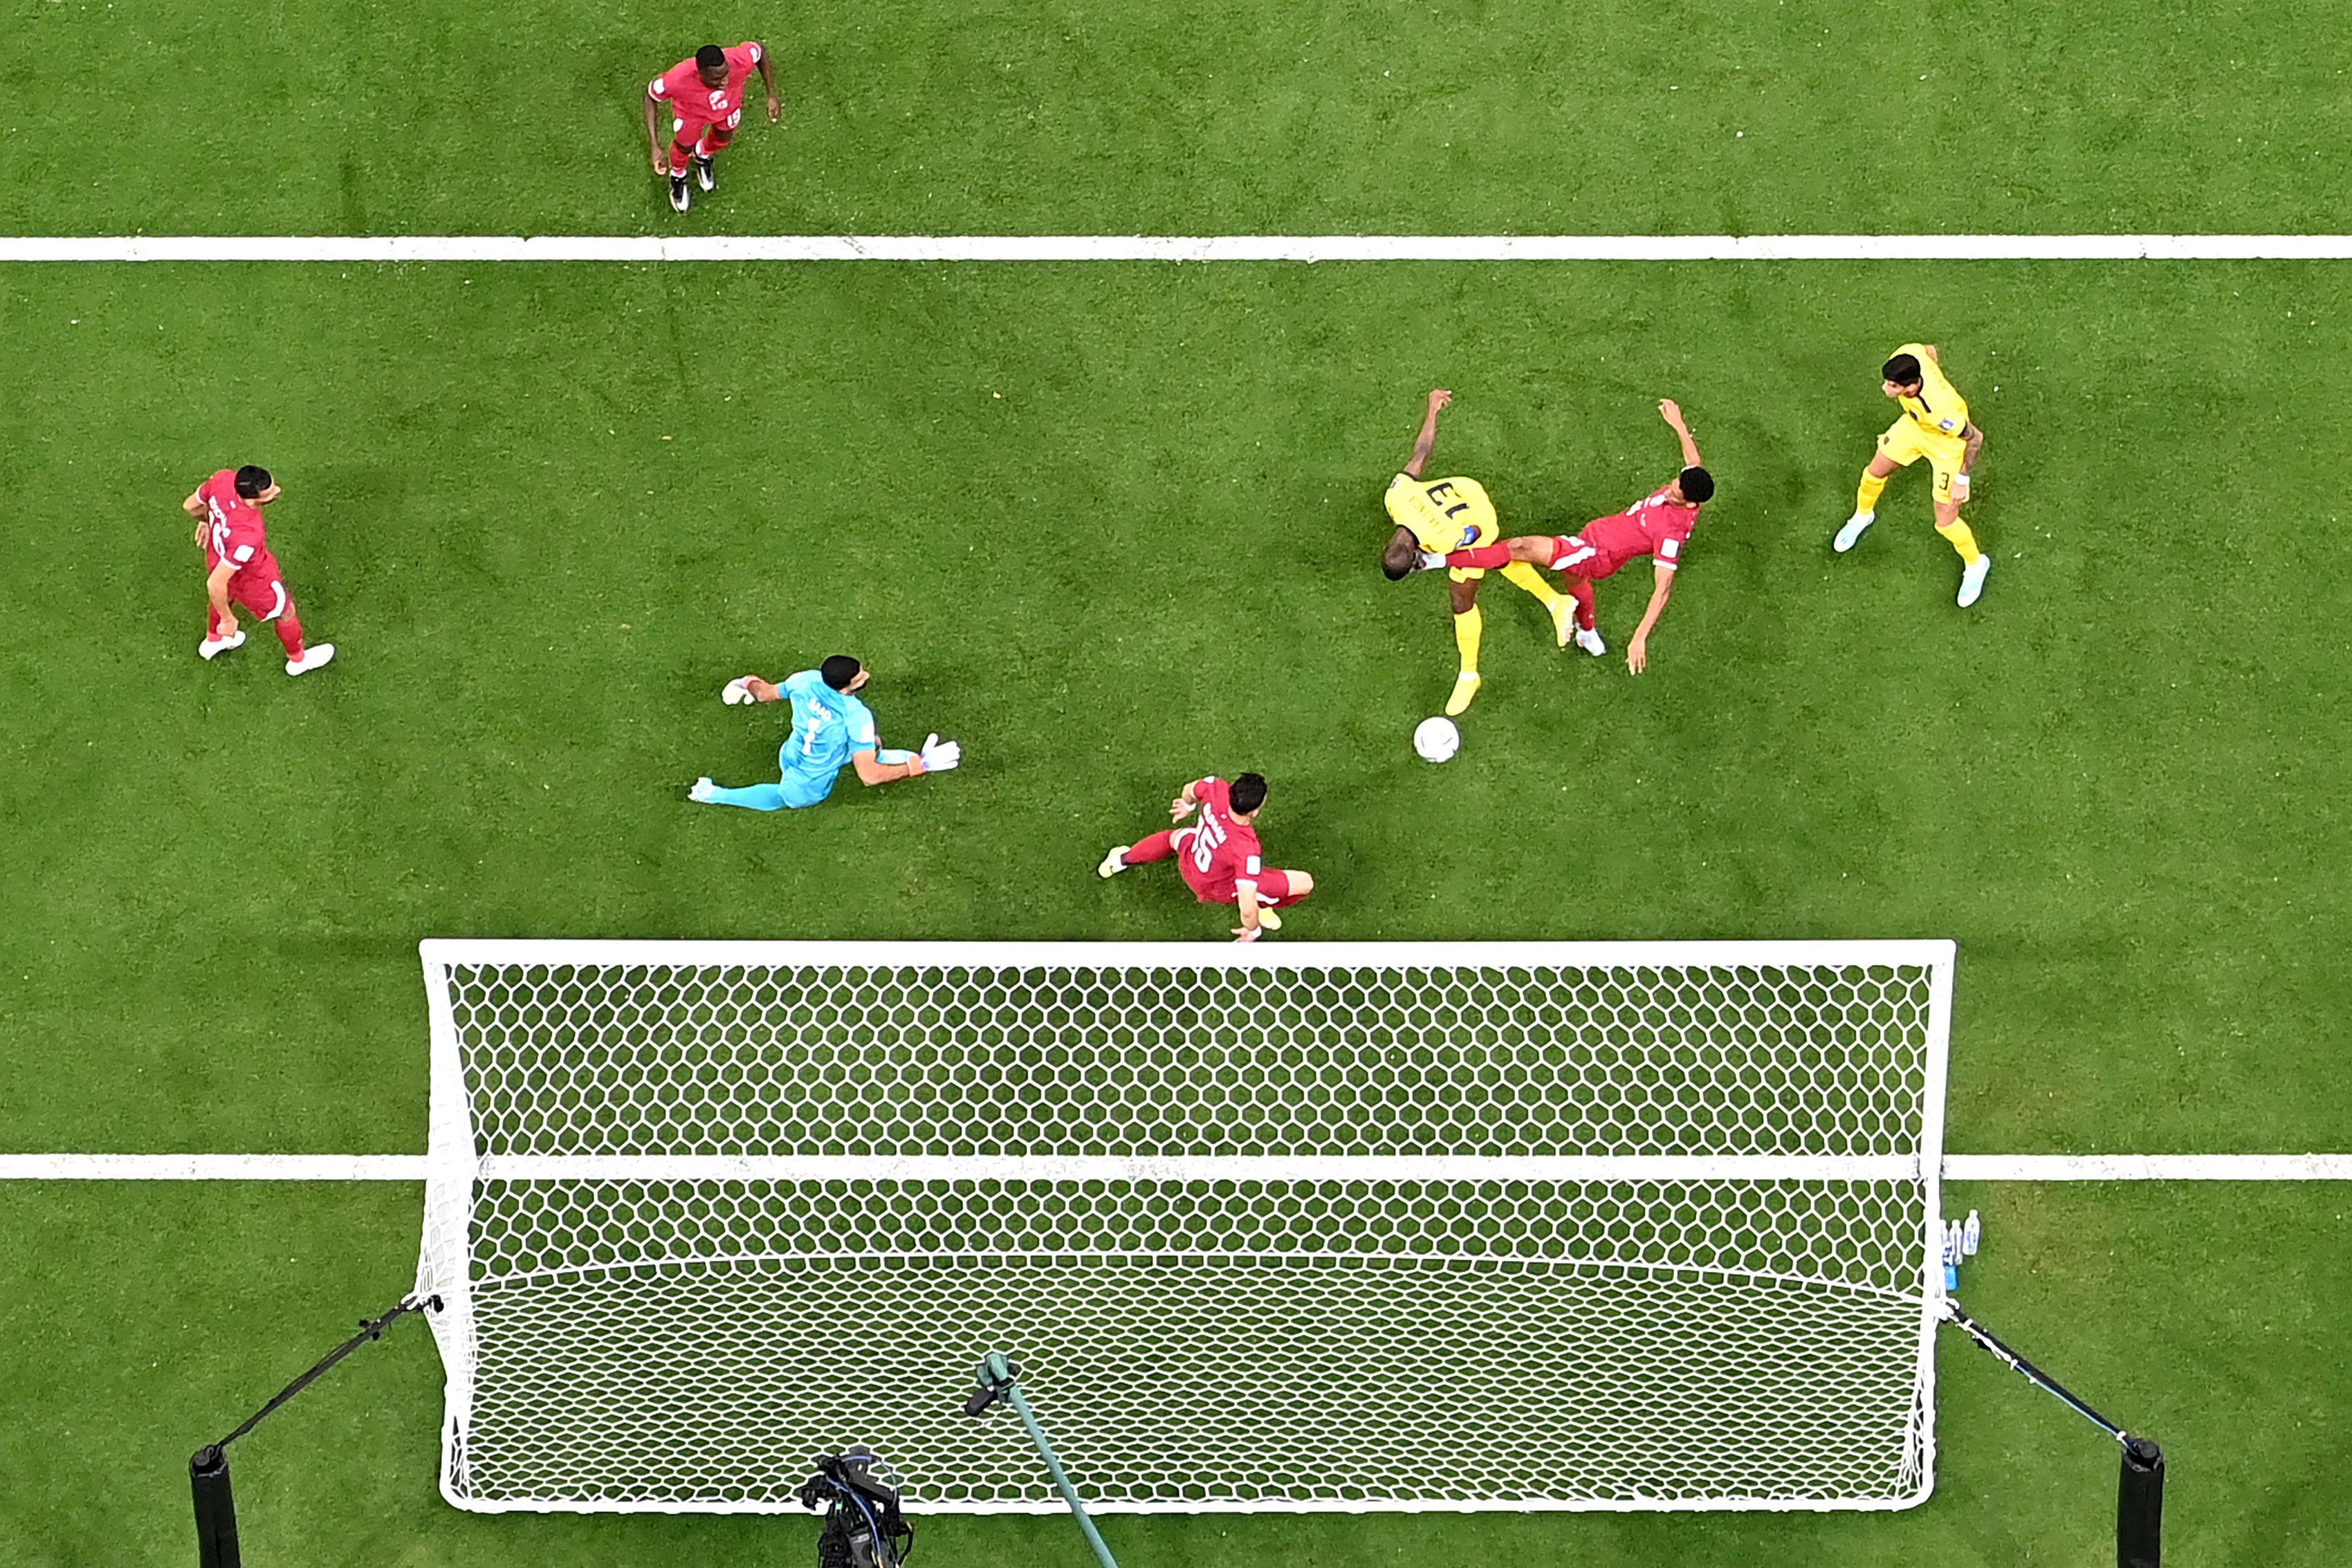 A bird's-eye view shot of a ball heading toward a soccer goal as several players are on the field.